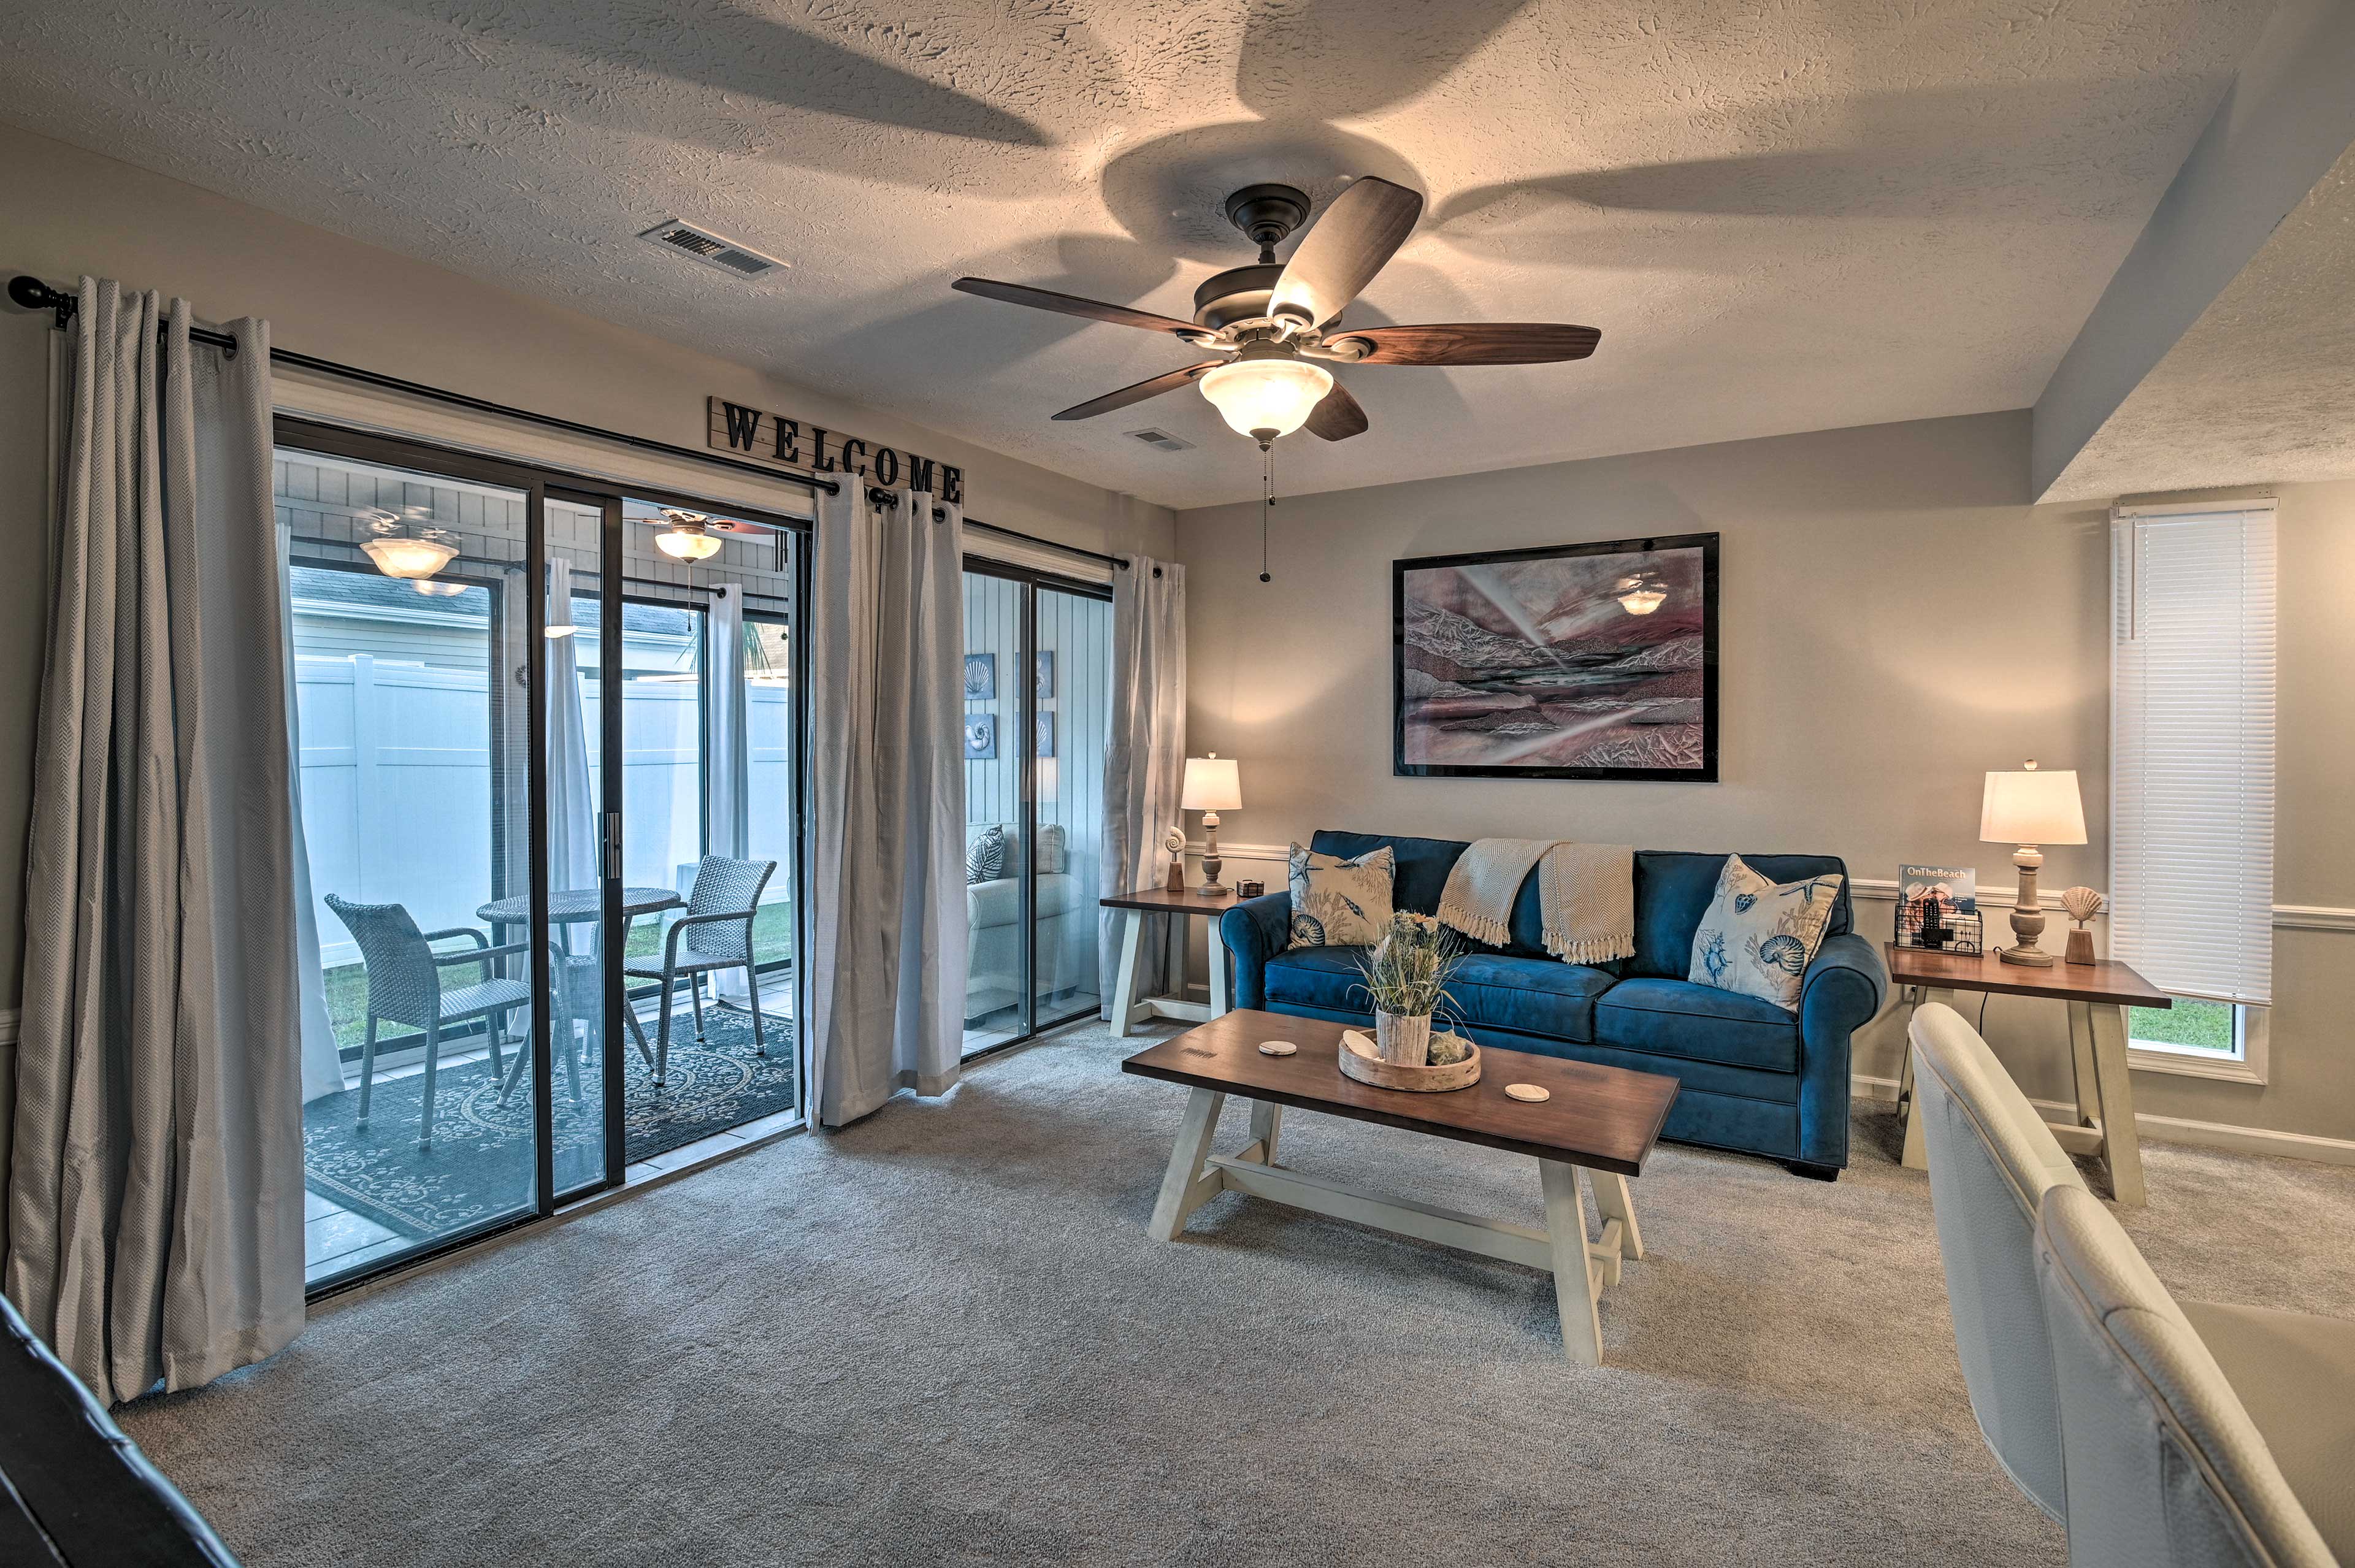 Myrtle Beach Vacation Rental | 1BR | 1BA | Step-Free Access | 1,074 Sq Ft